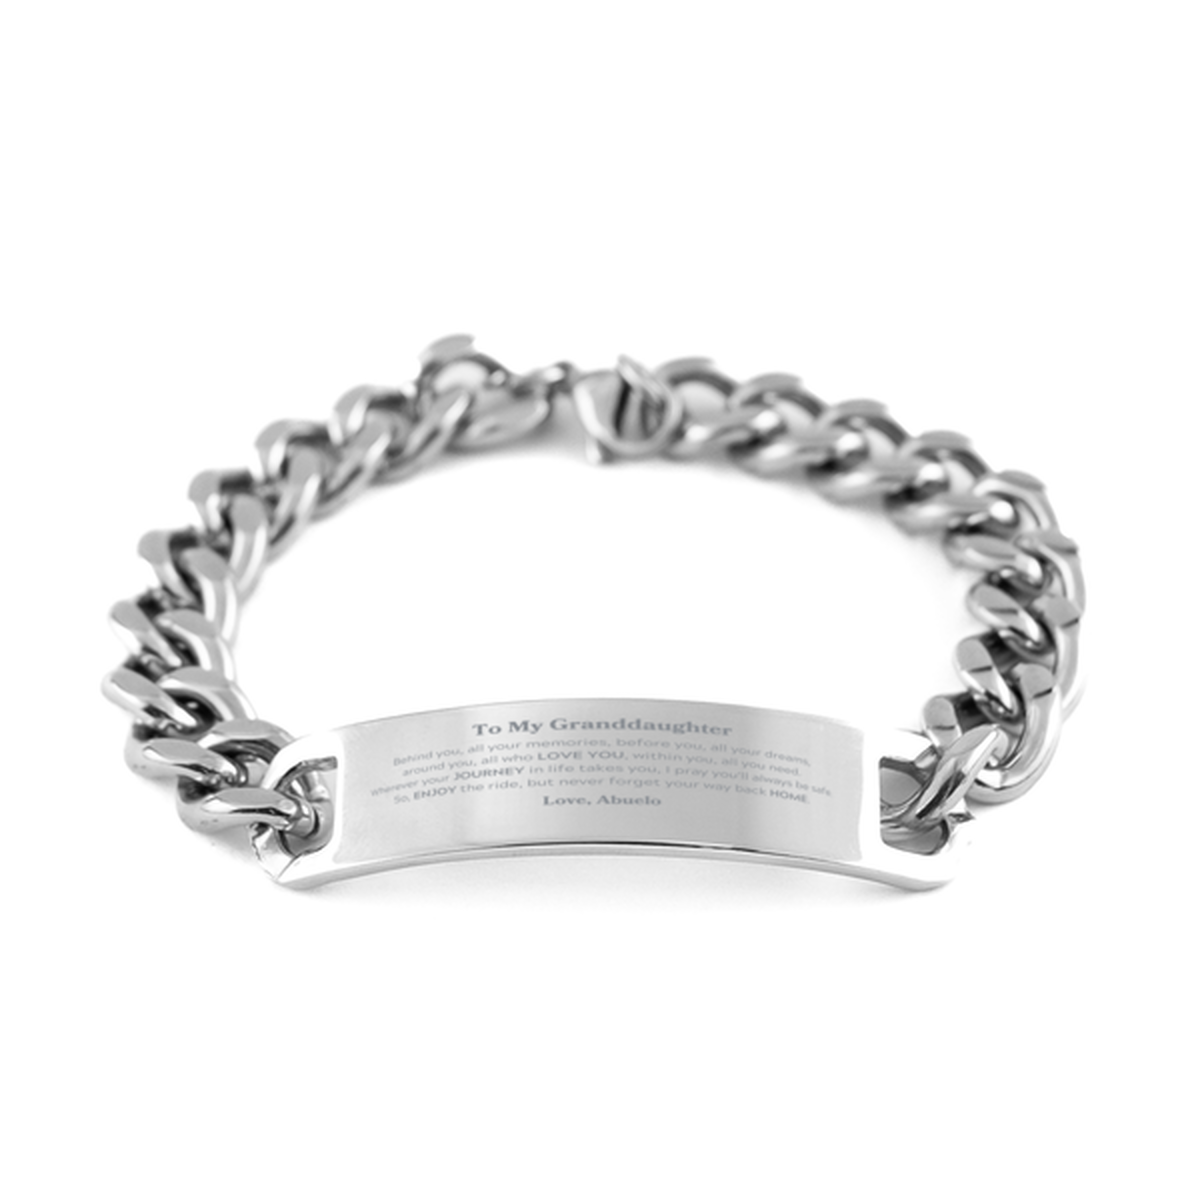 To My Granddaughter Graduation Gifts from Abuelo, Granddaughter Cuban Chain Stainless Steel Bracelet Christmas Birthday Gifts for Granddaughter Behind you, all your memories, before you, all your dreams. Love, Abuelo